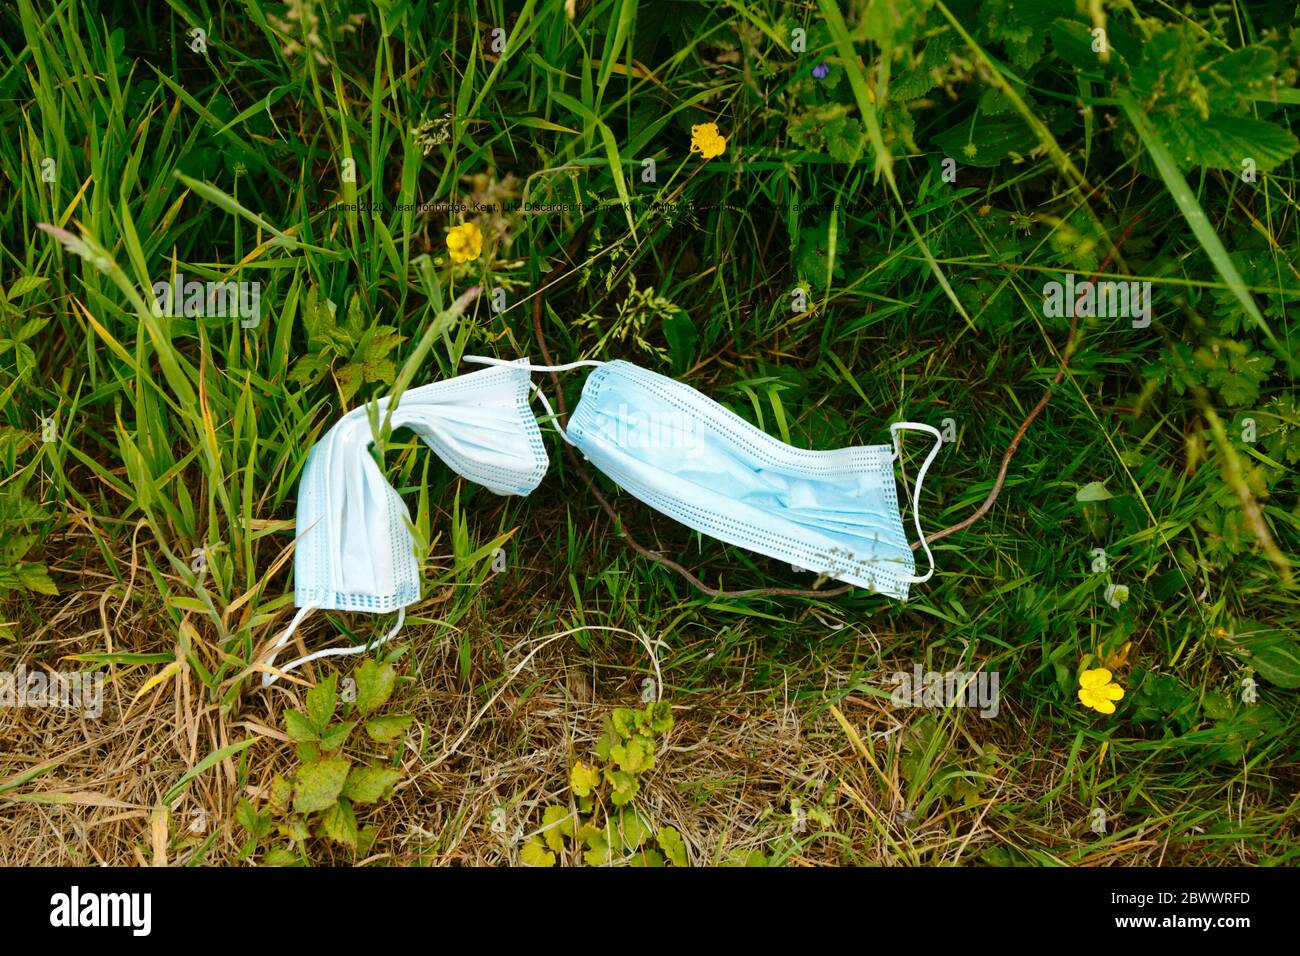 2nd June 2020, near Tonbridge, Kent, UK: Discarded face masks in wildflowers next to hedgerow alongside a country lane, likely thrown from a passing vehicle or cyclist. The yellow flowers are creeping buttercup (Ranunculus repens) Stock Photo